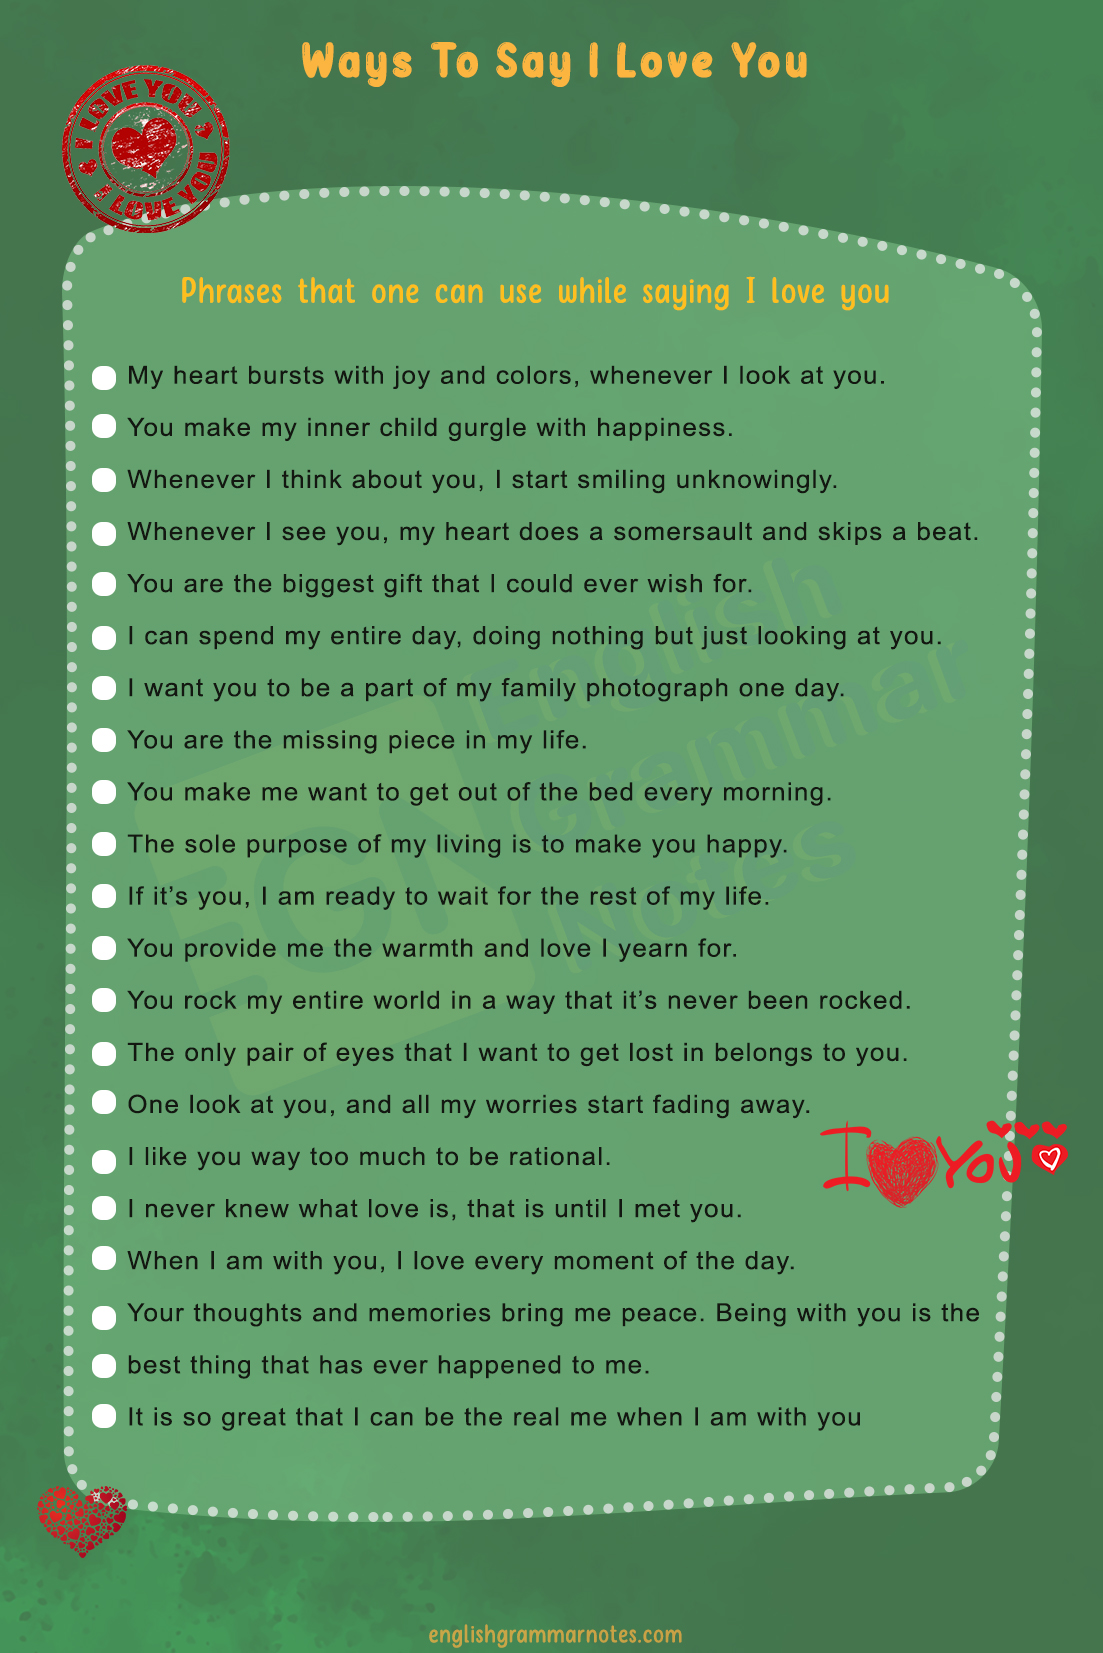 Ways To Say I Love You 2